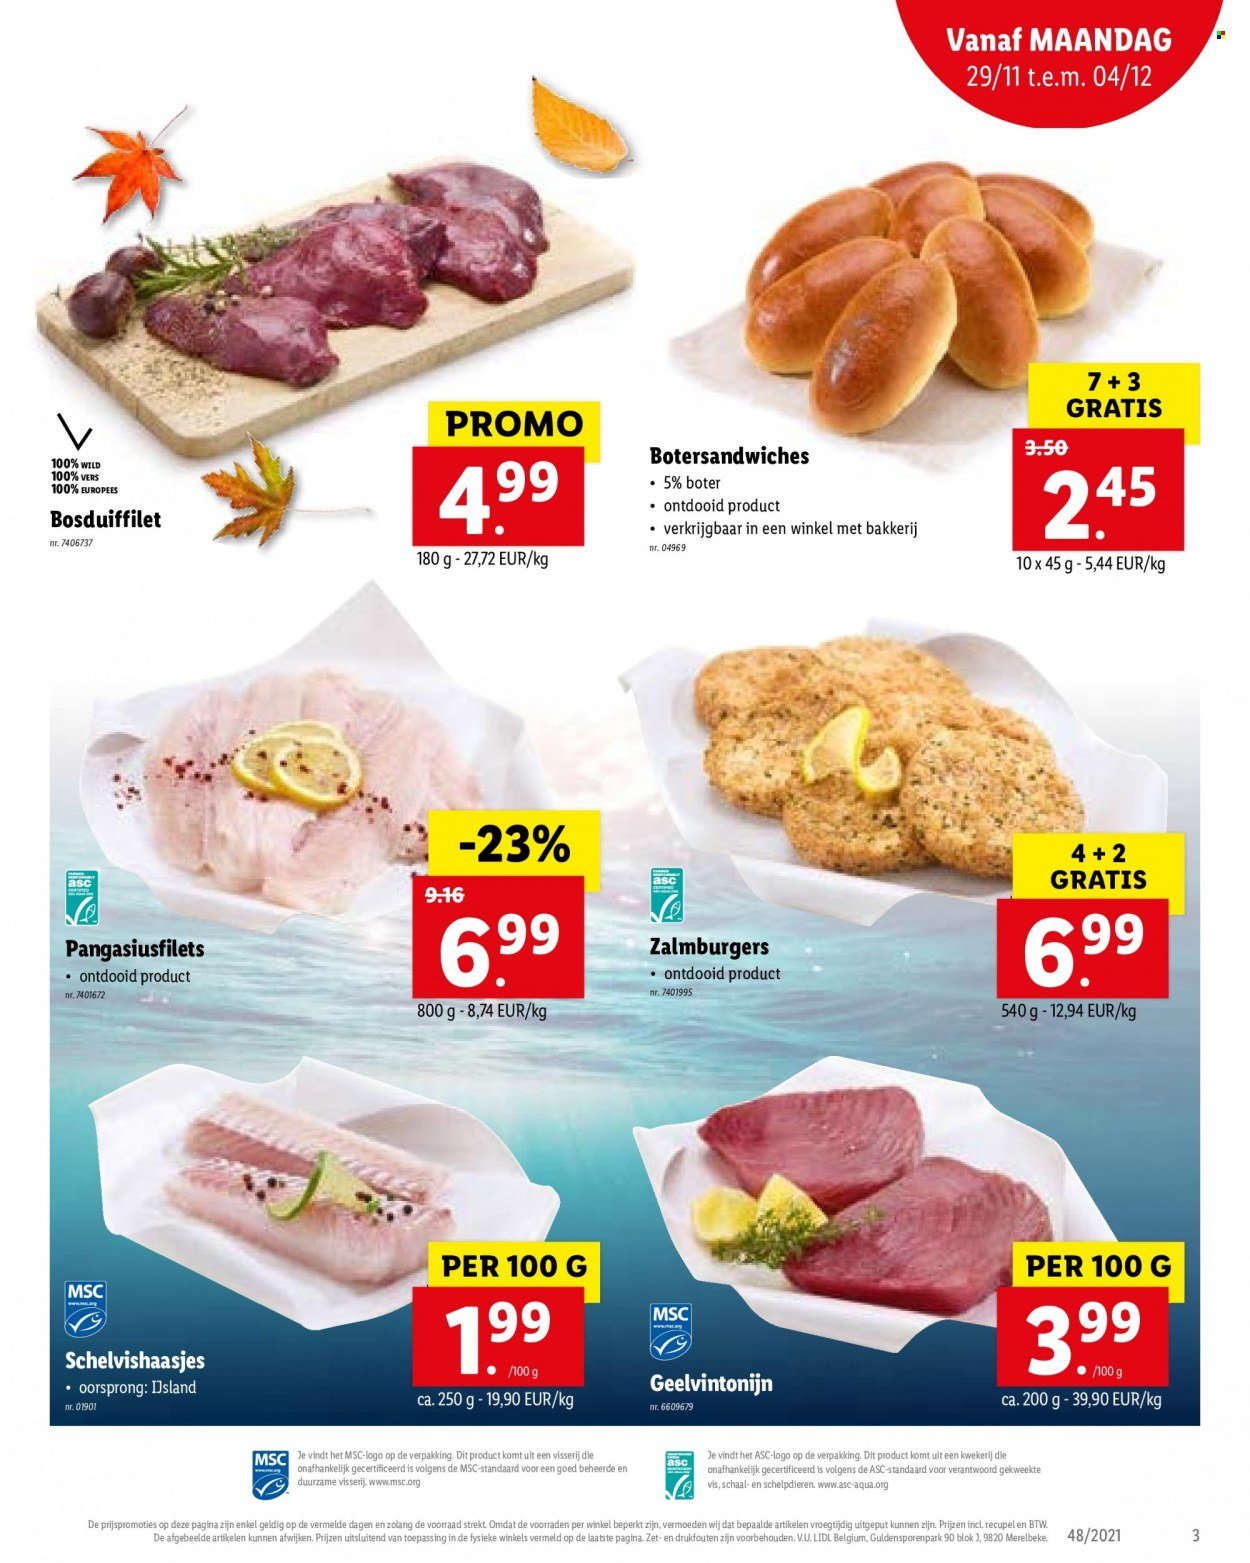 Catalogue Lidl - 29.11.2021 - 4.12.2021. Page 3.